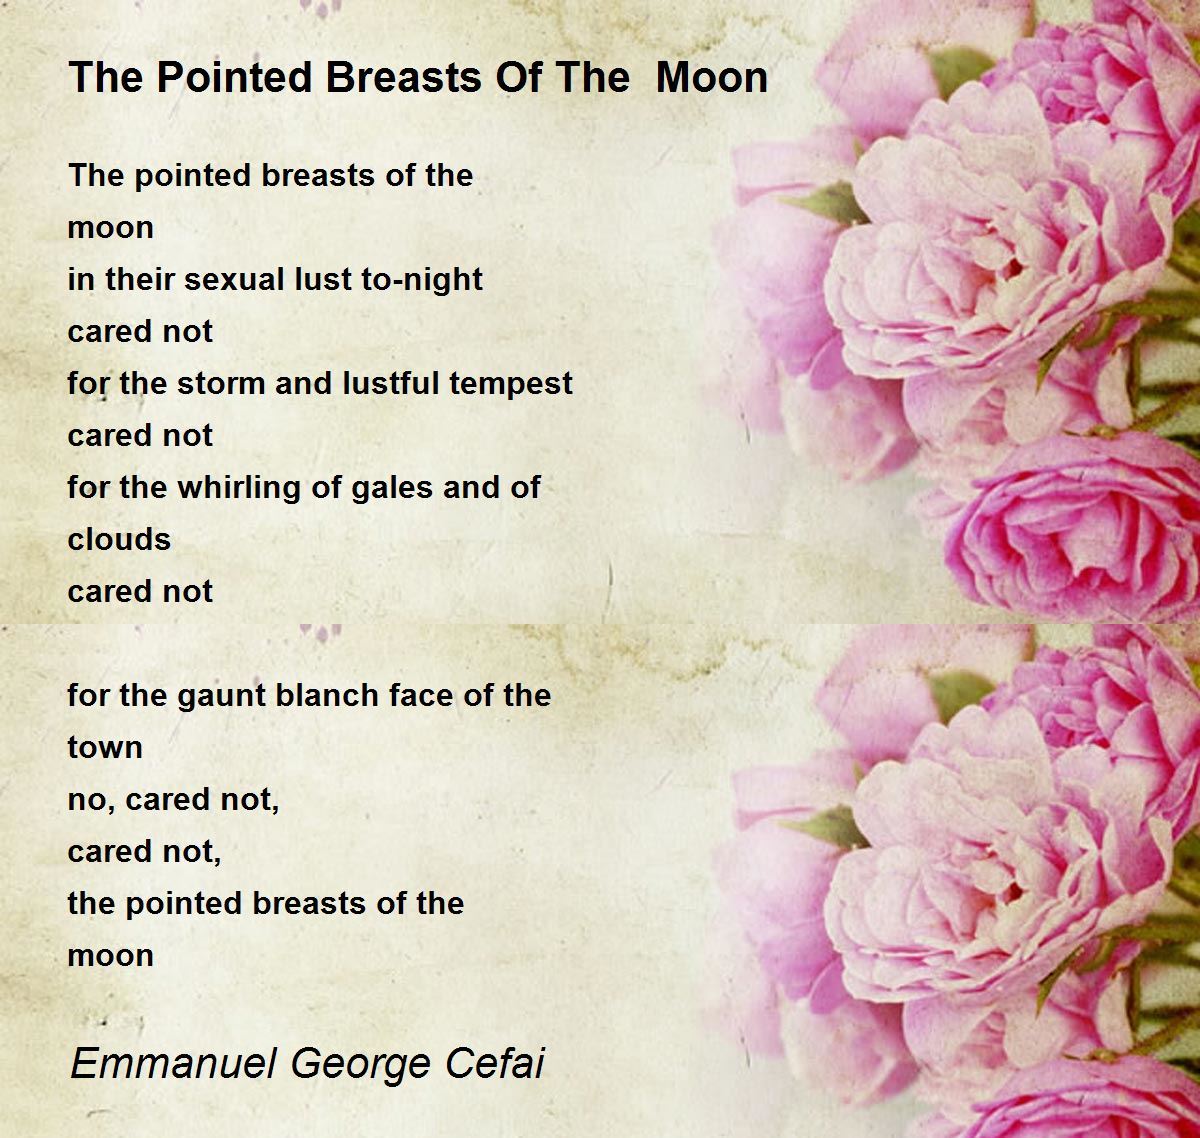 The Pointed Breasts Of The Moon - The Pointed Breasts Of The Moon